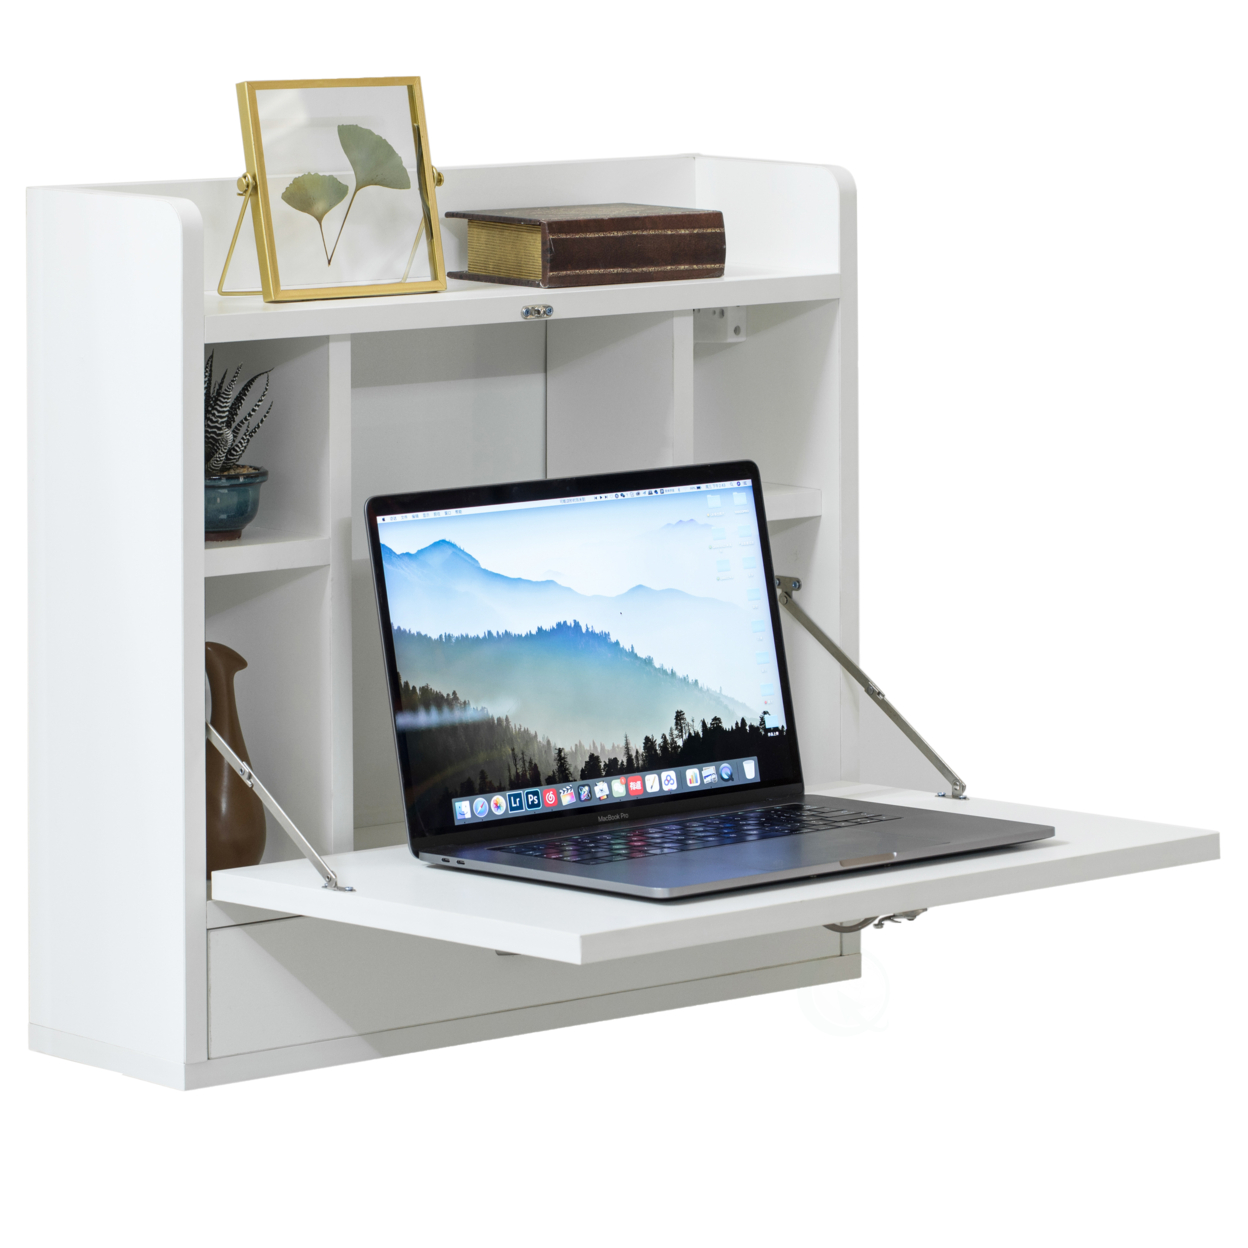 Wall Mount Folding Laptop Writing Computer Or Makeup Desk With Storage Shelves And Drawer - White